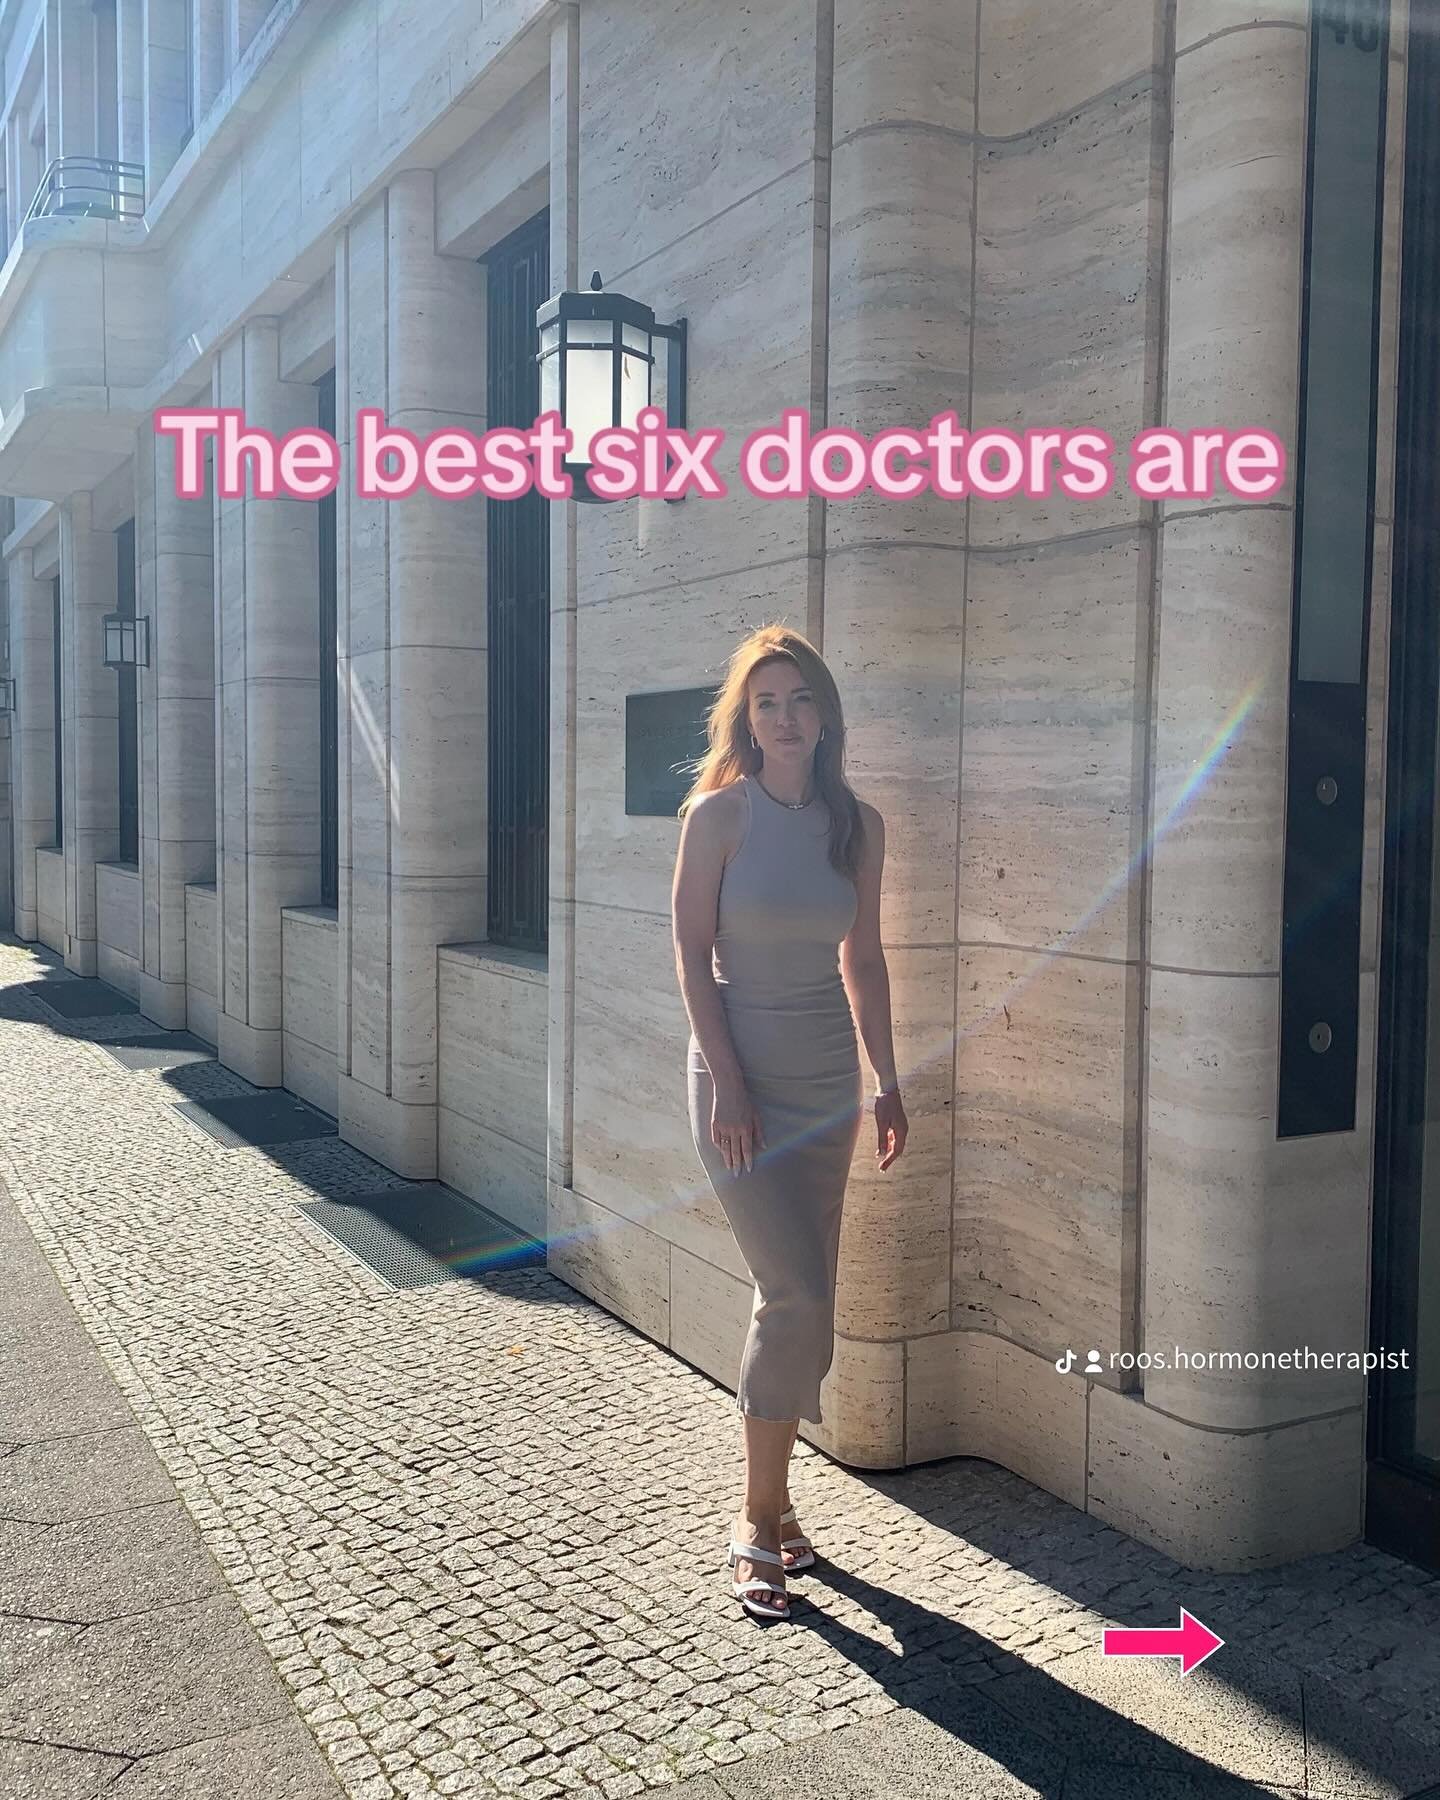 And the best thing is.. it&rsquo;s available to all of us!🩷
What is your favorite natural medicine?

#holistichealth #longevity #hormonehealth #hormonesupport #wellnesstips #wellbeingtips #womenshealth #hormonecoach #hormoneexpert